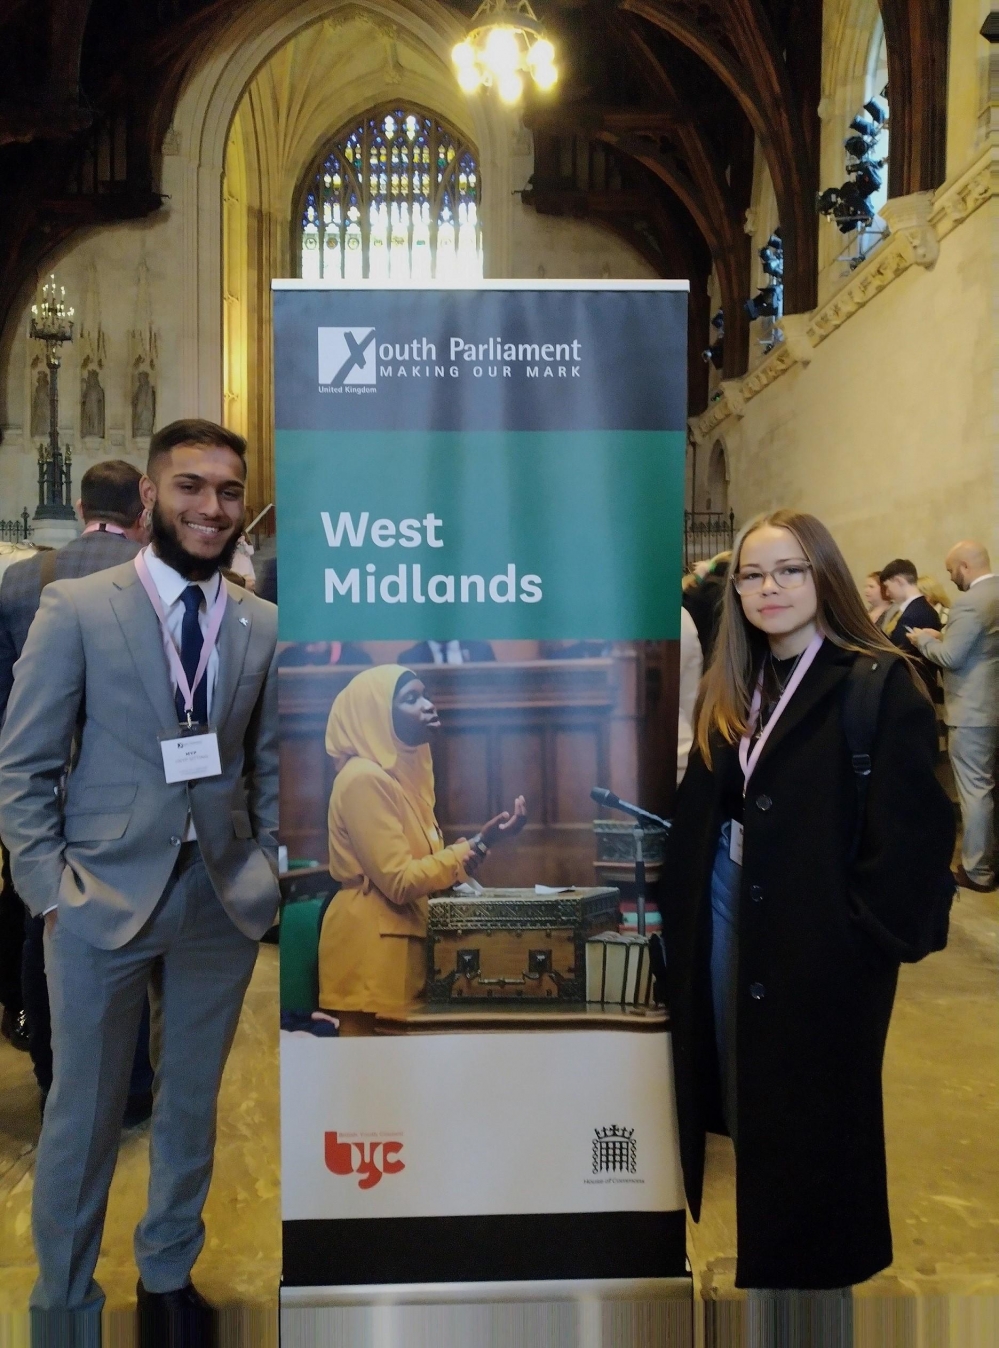 Mohammed Al-Hasan from Wednesbury, and Olivia Gall from Tividale, representing Sandwell and its young people, at the House of Commons.